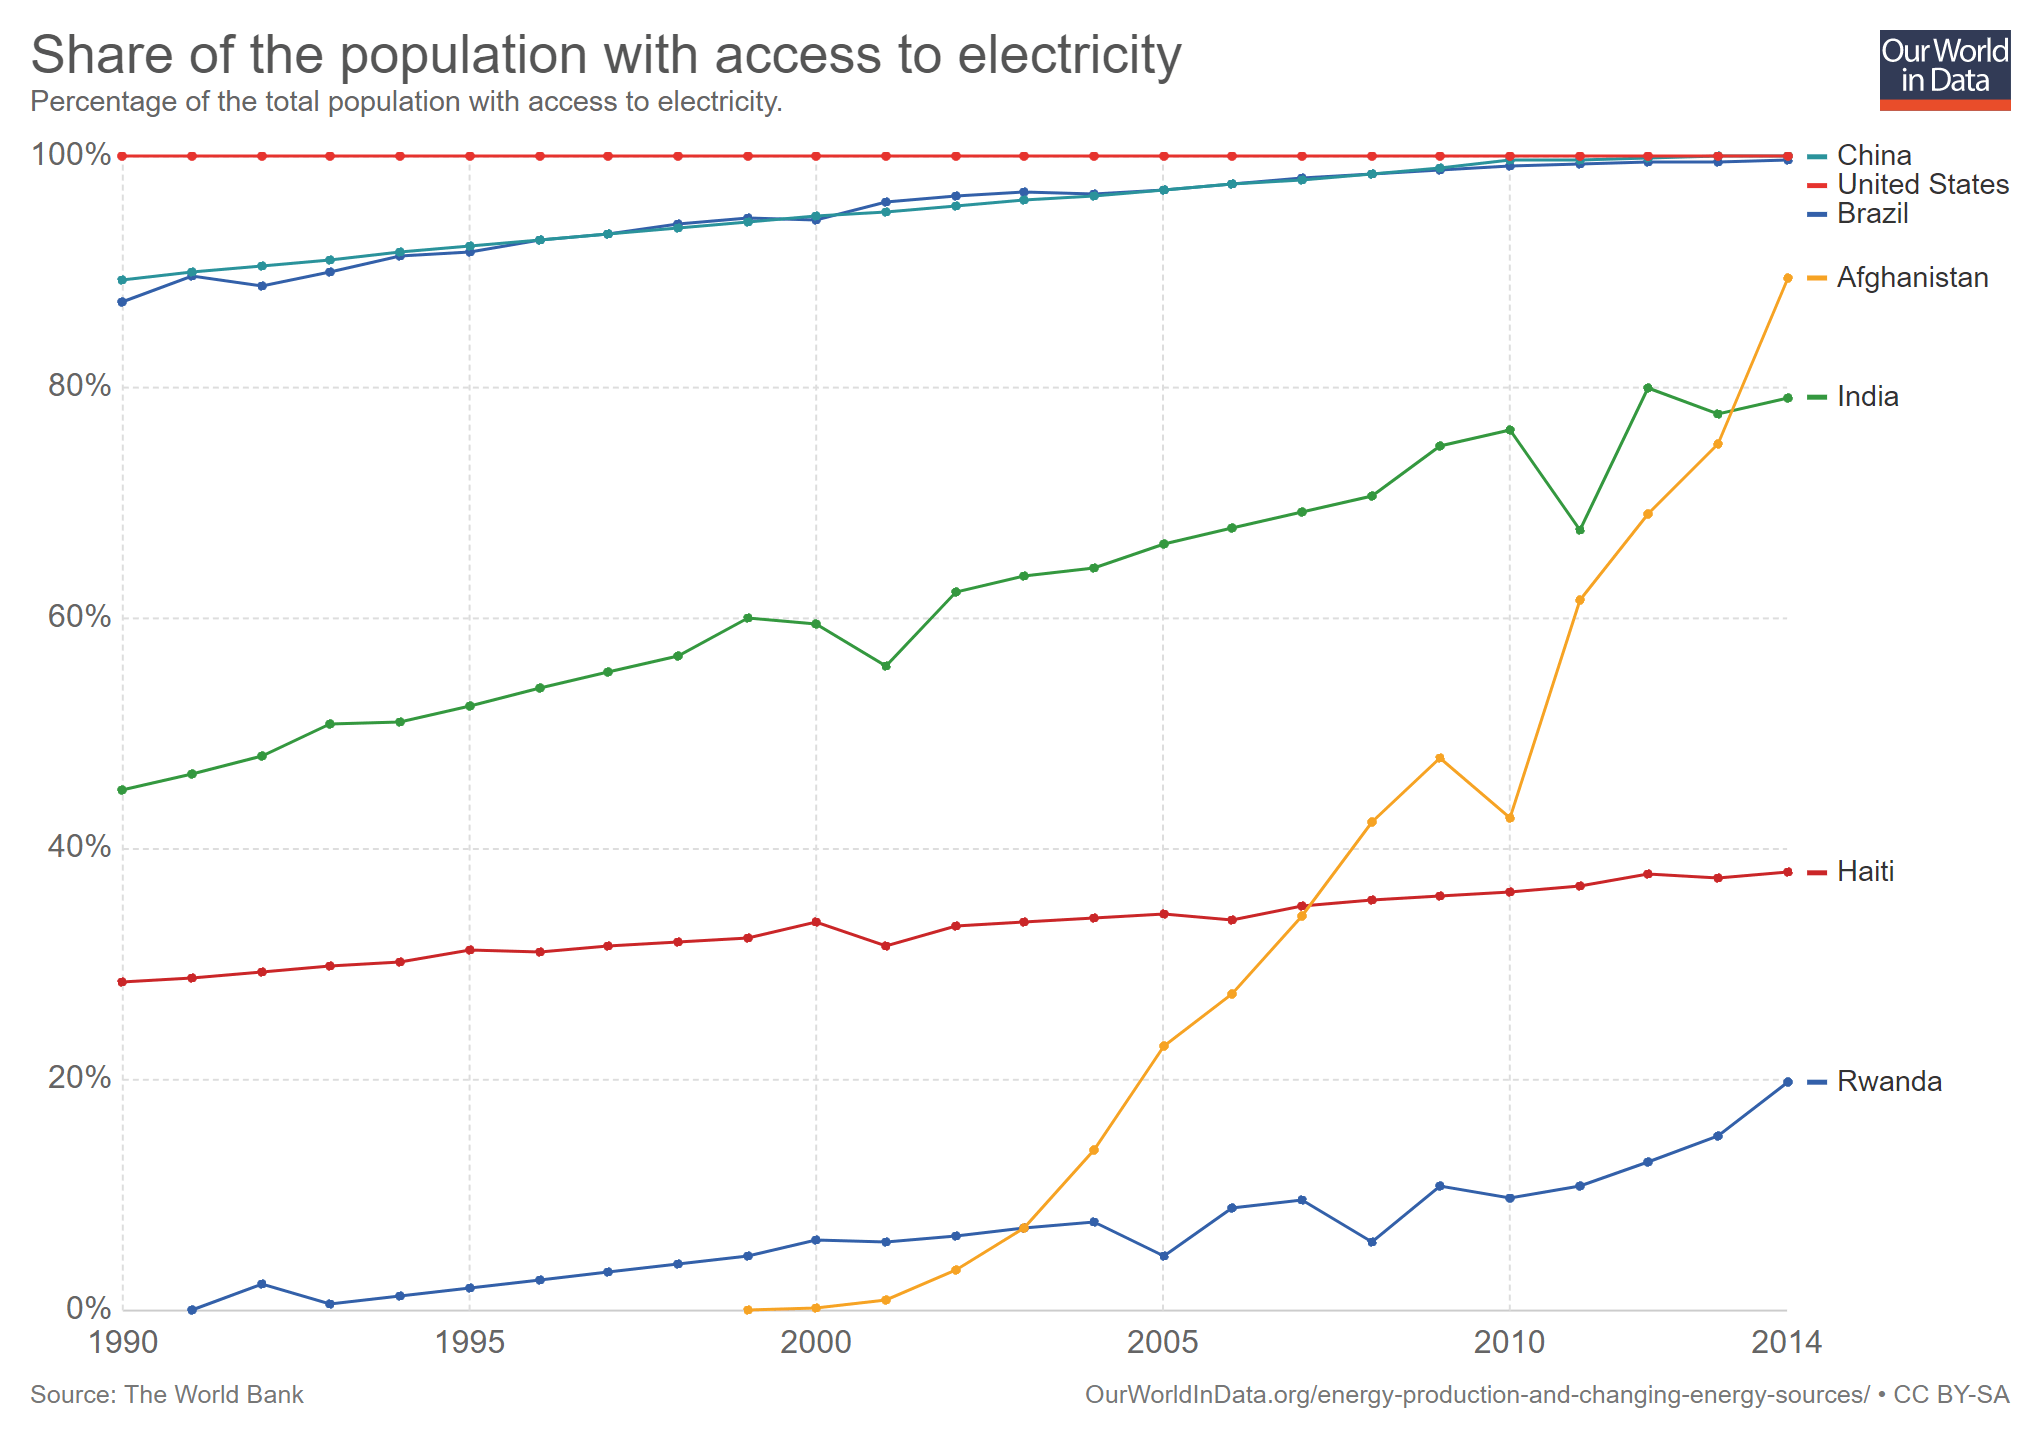 share-of-the-population-with-access-to-electricity-1990-2014